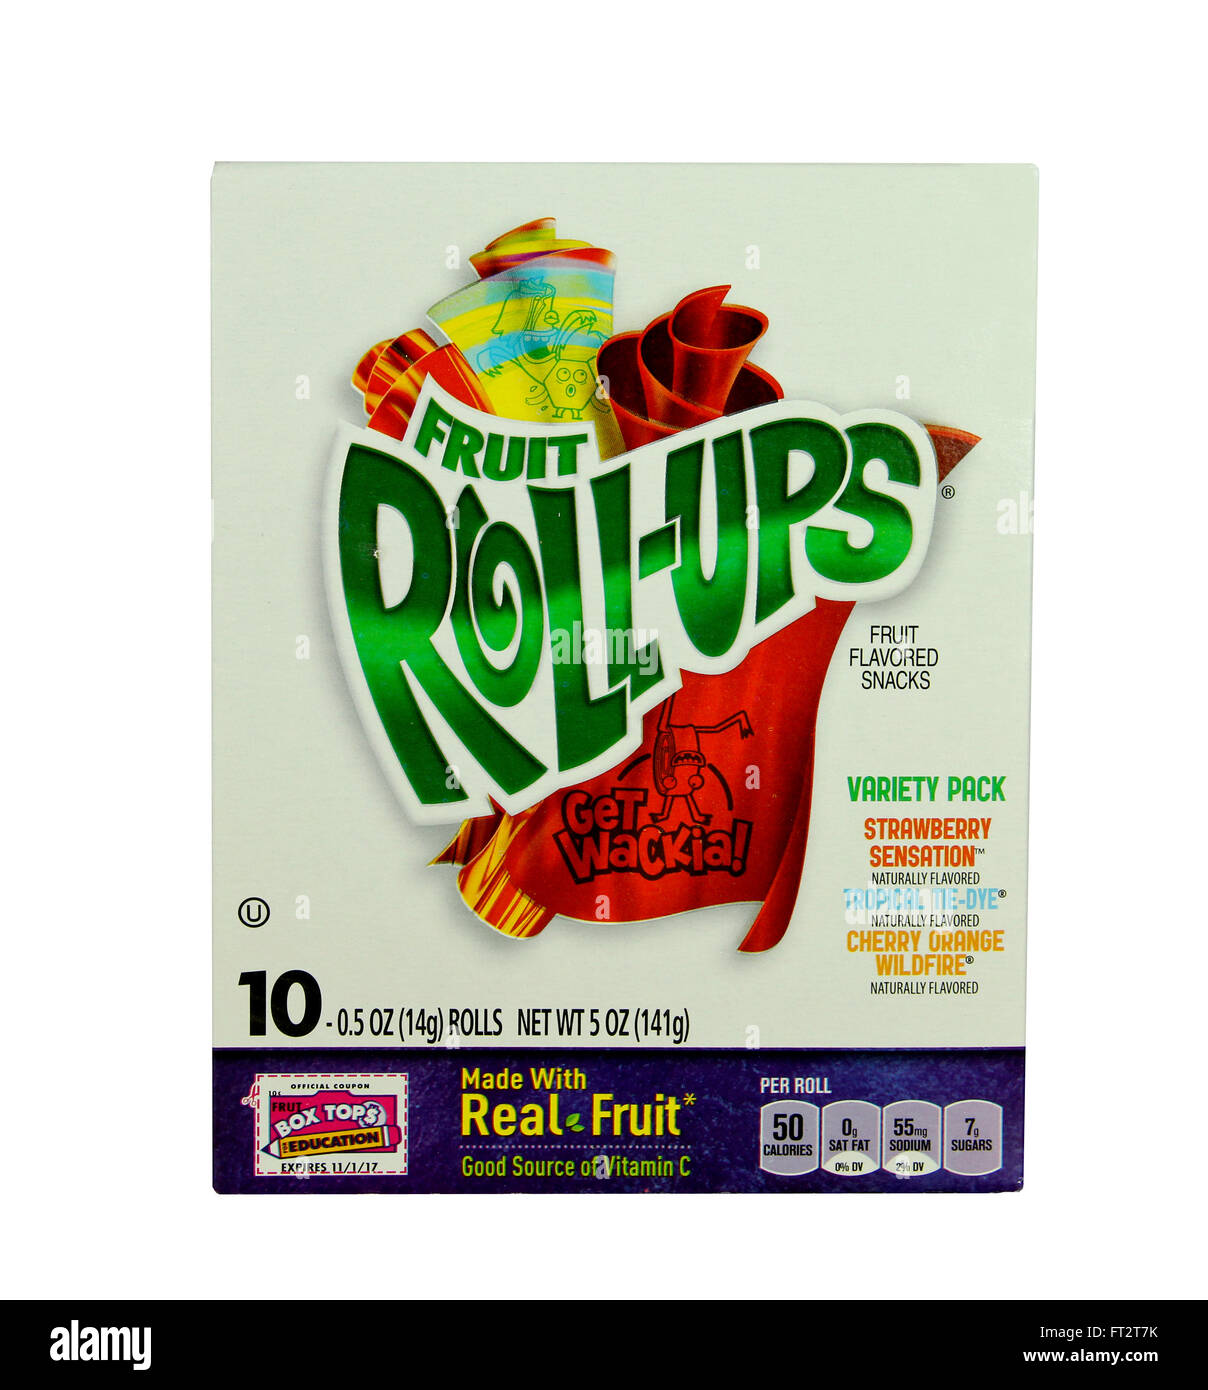 Fruit Roll Ups High Resolution Stock Photography and Images - Alamy